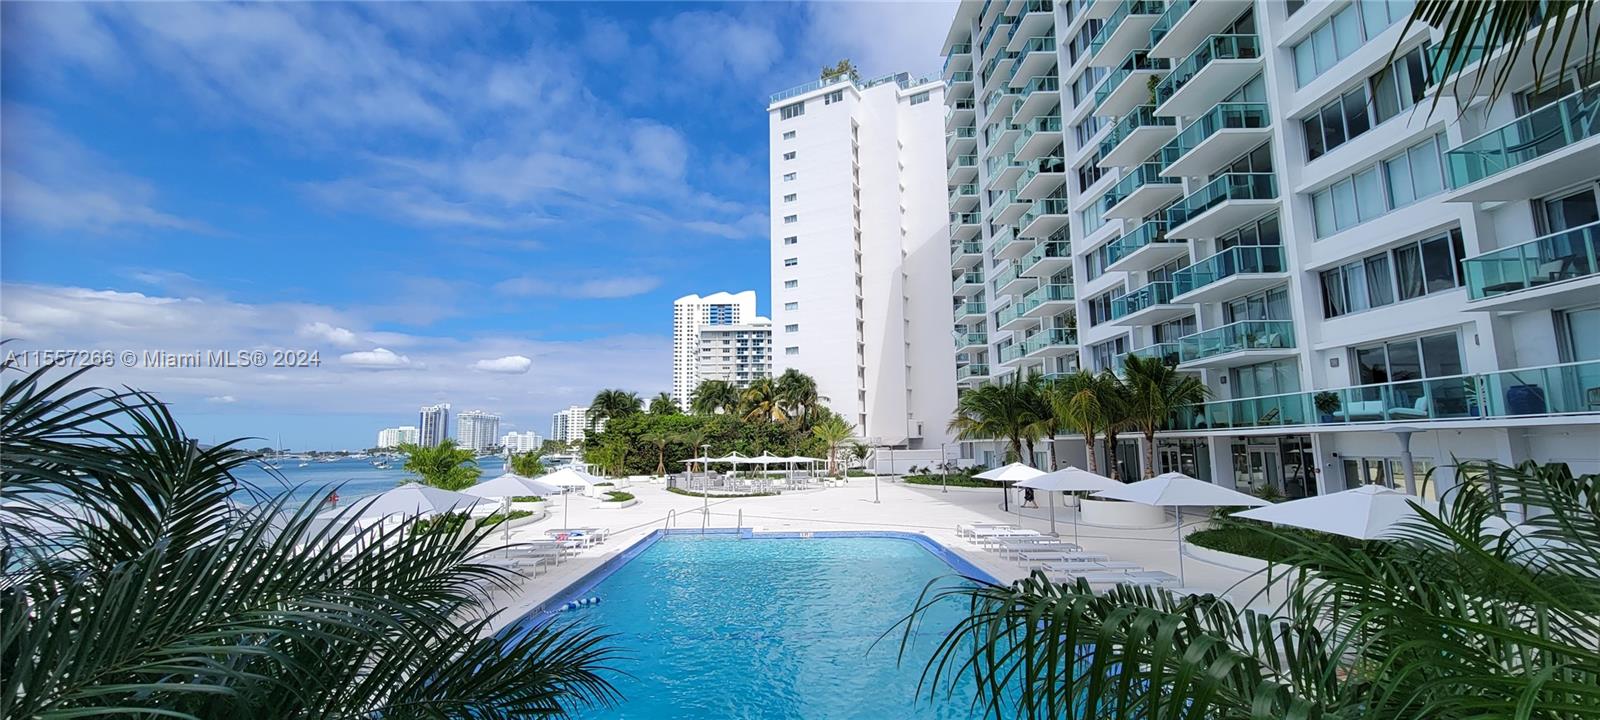 1000  West Ave #1101 For Sale A11557266, FL